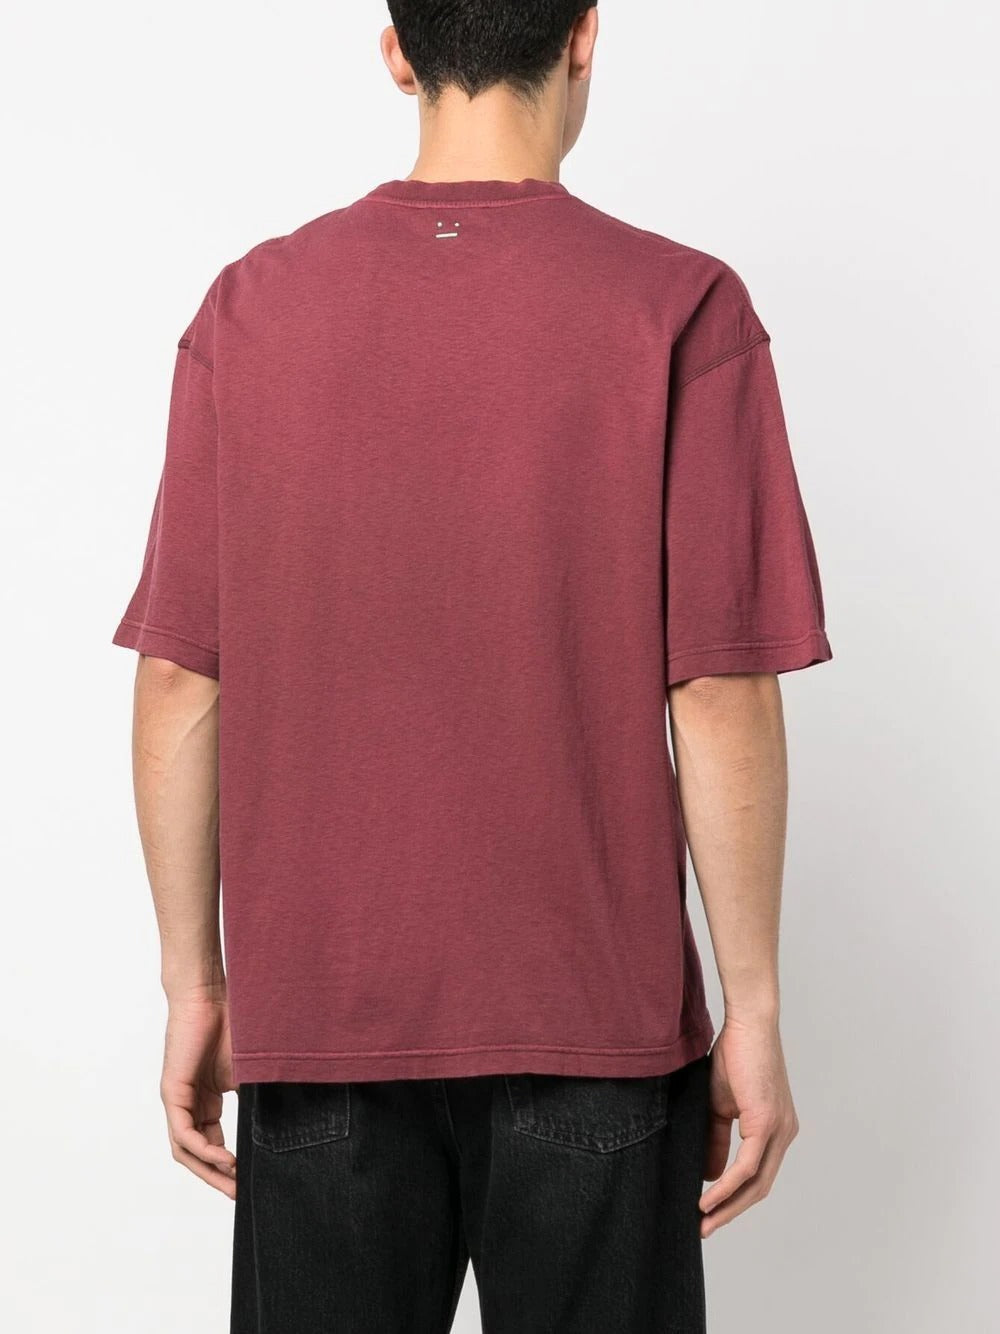 ACNE STUDIOS-T-SHIRTS-CL0163 ACD